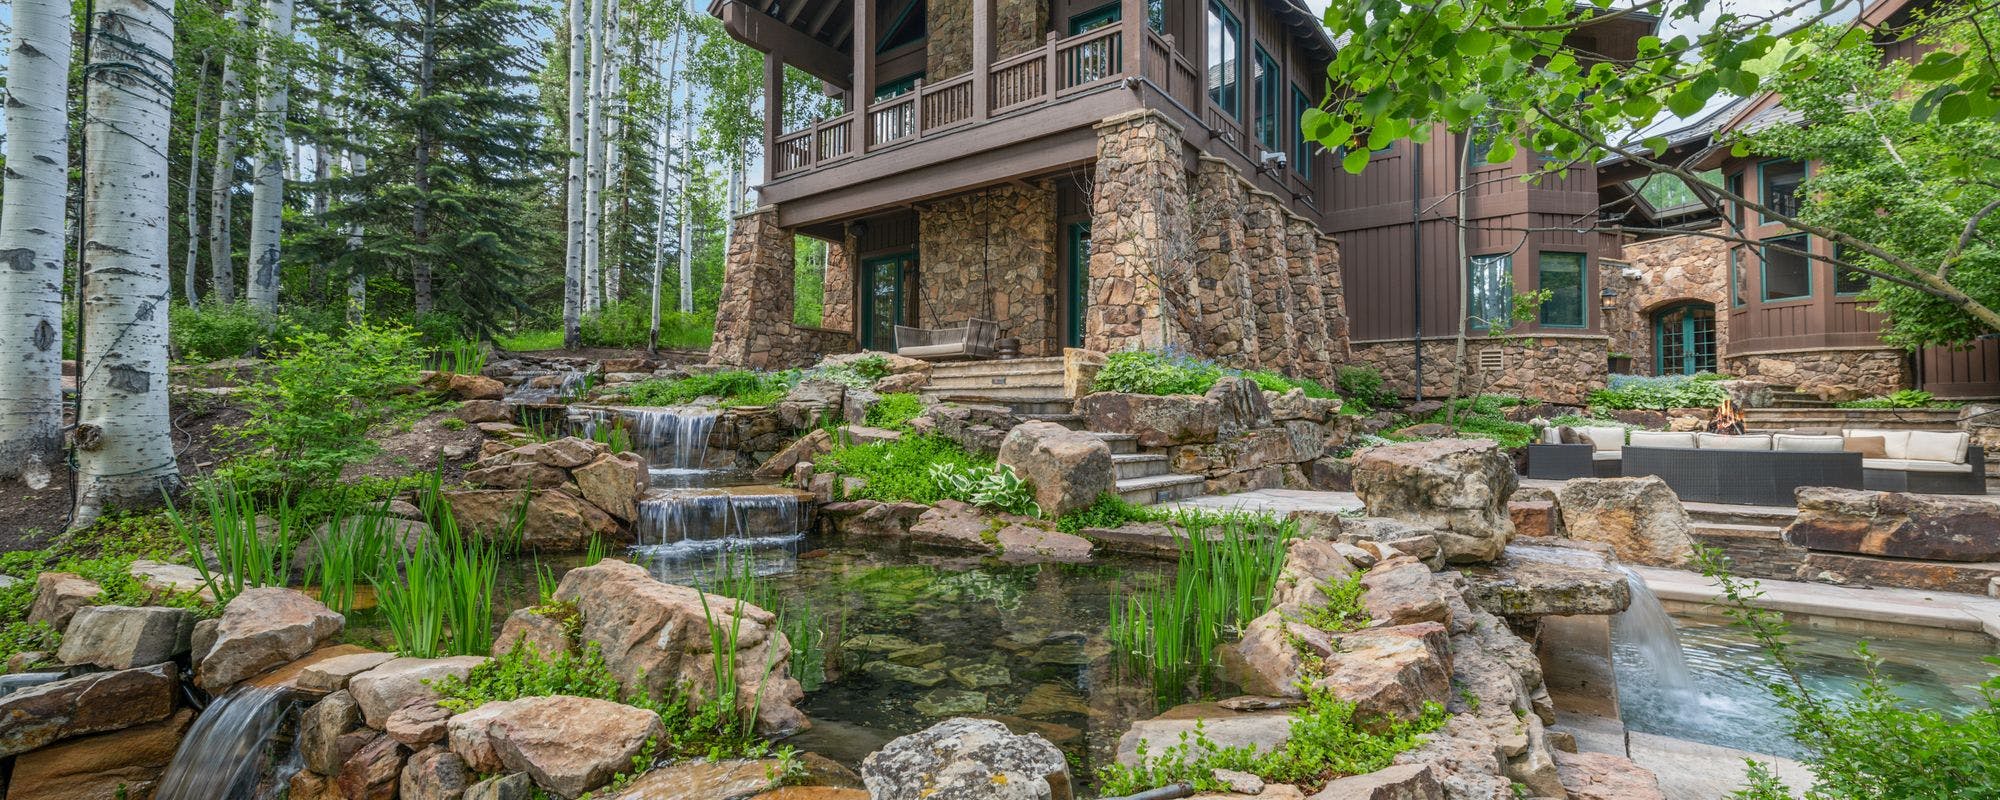 Exterior of Vail Valley vacation home